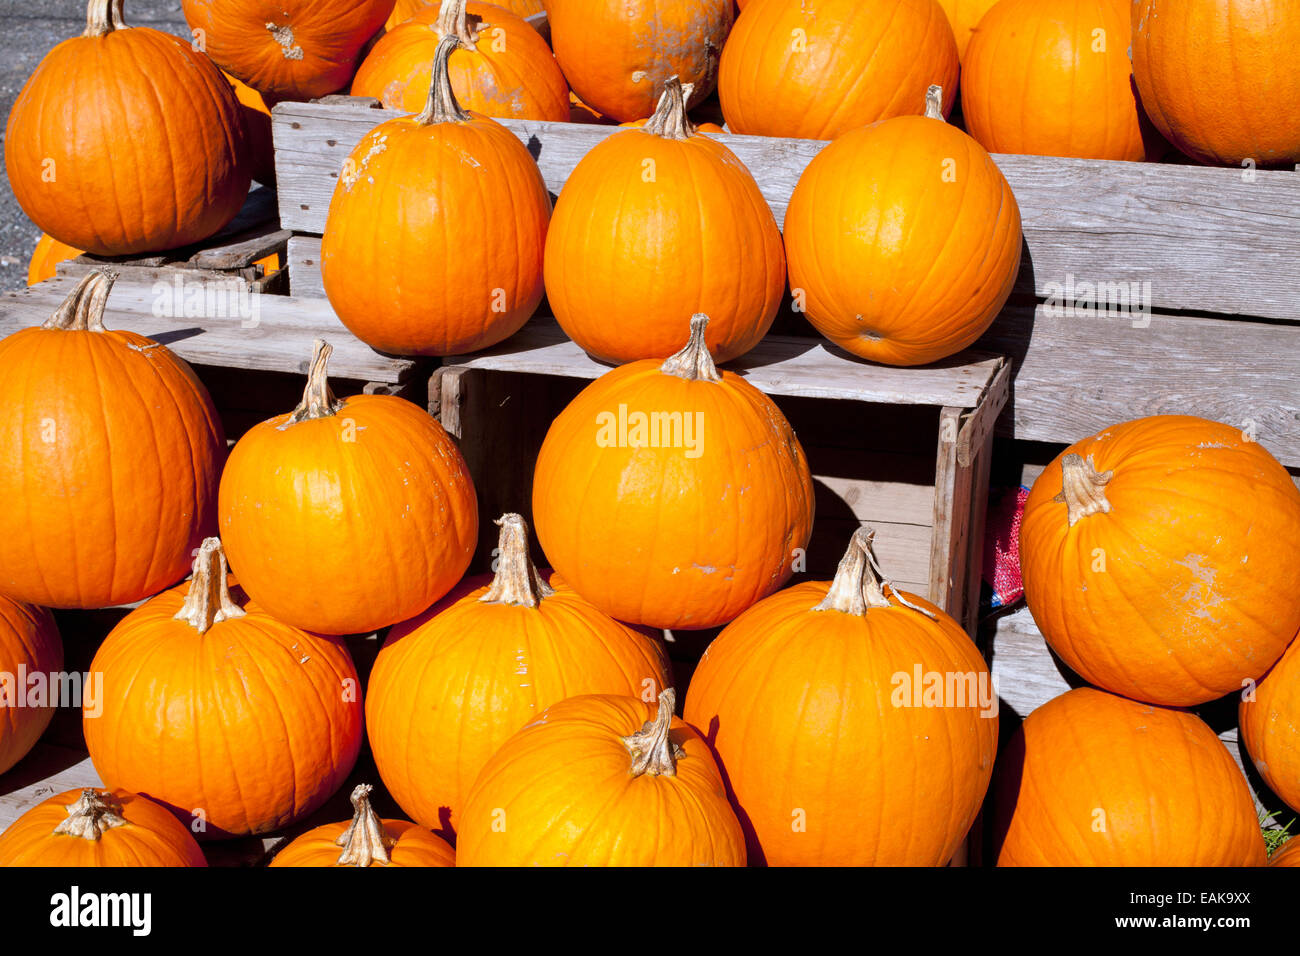 Pumpkins at the autumn market, Granby, Eastern Townships, Quebec Province, Canada Stock Photo